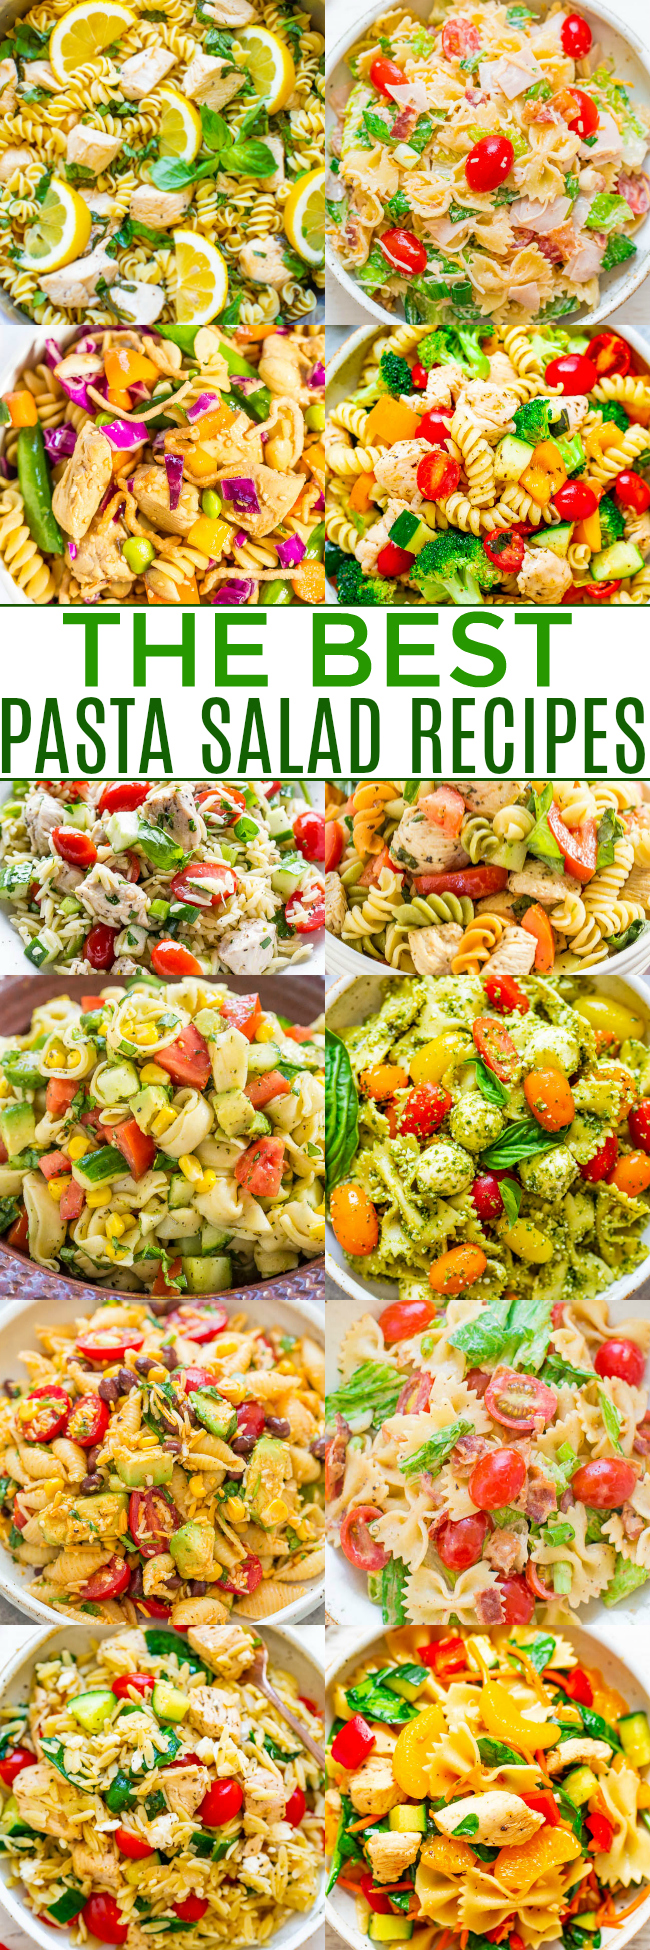 The Best Pasta Salad Recipes - There's something for everyone in this collection of FAST and EASY pasta salad recipes!! Whether you need something to bring to a potluck or picnic, or are in need of a no-fuss weeknight meal the whole family will enjoy, these recipes have you covered!! 